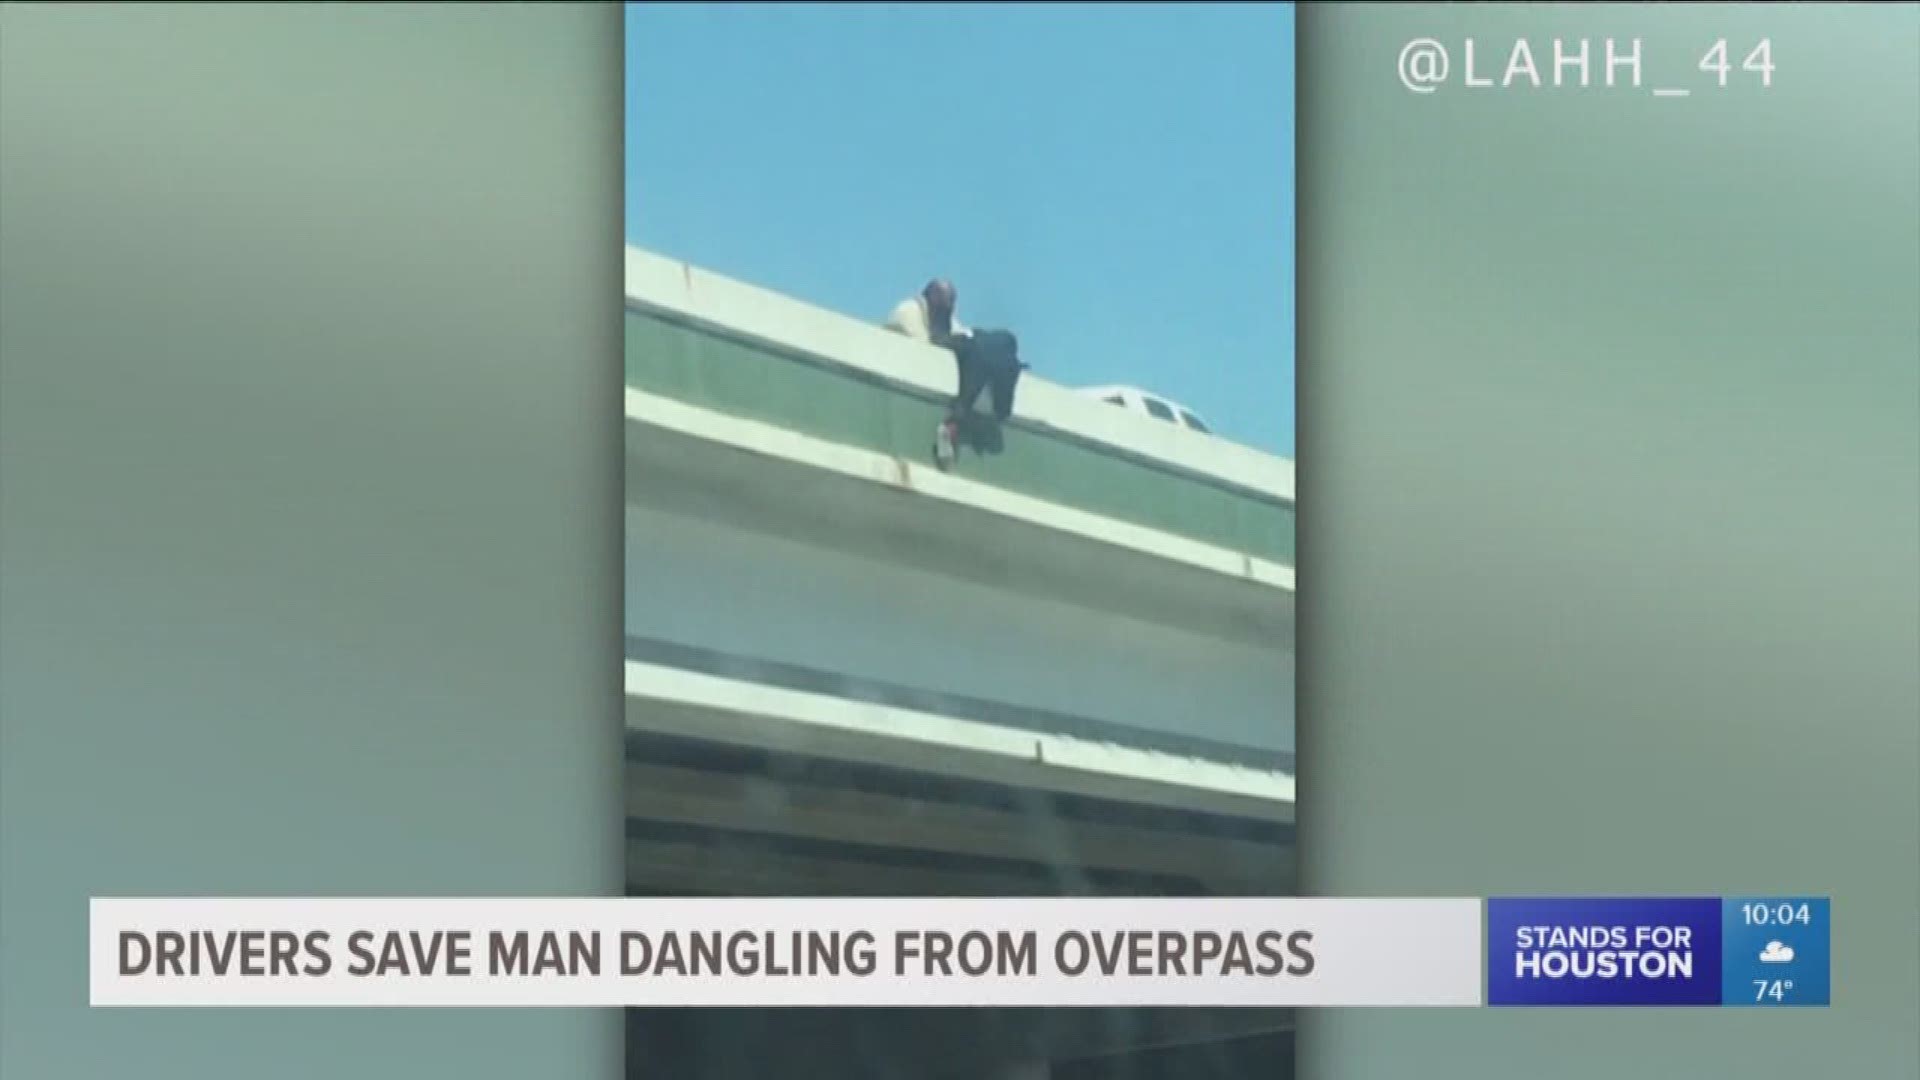 A man has some brave deputies and drivers to thank for saving his life. He was pulled to safety after dangling from an overpass. 